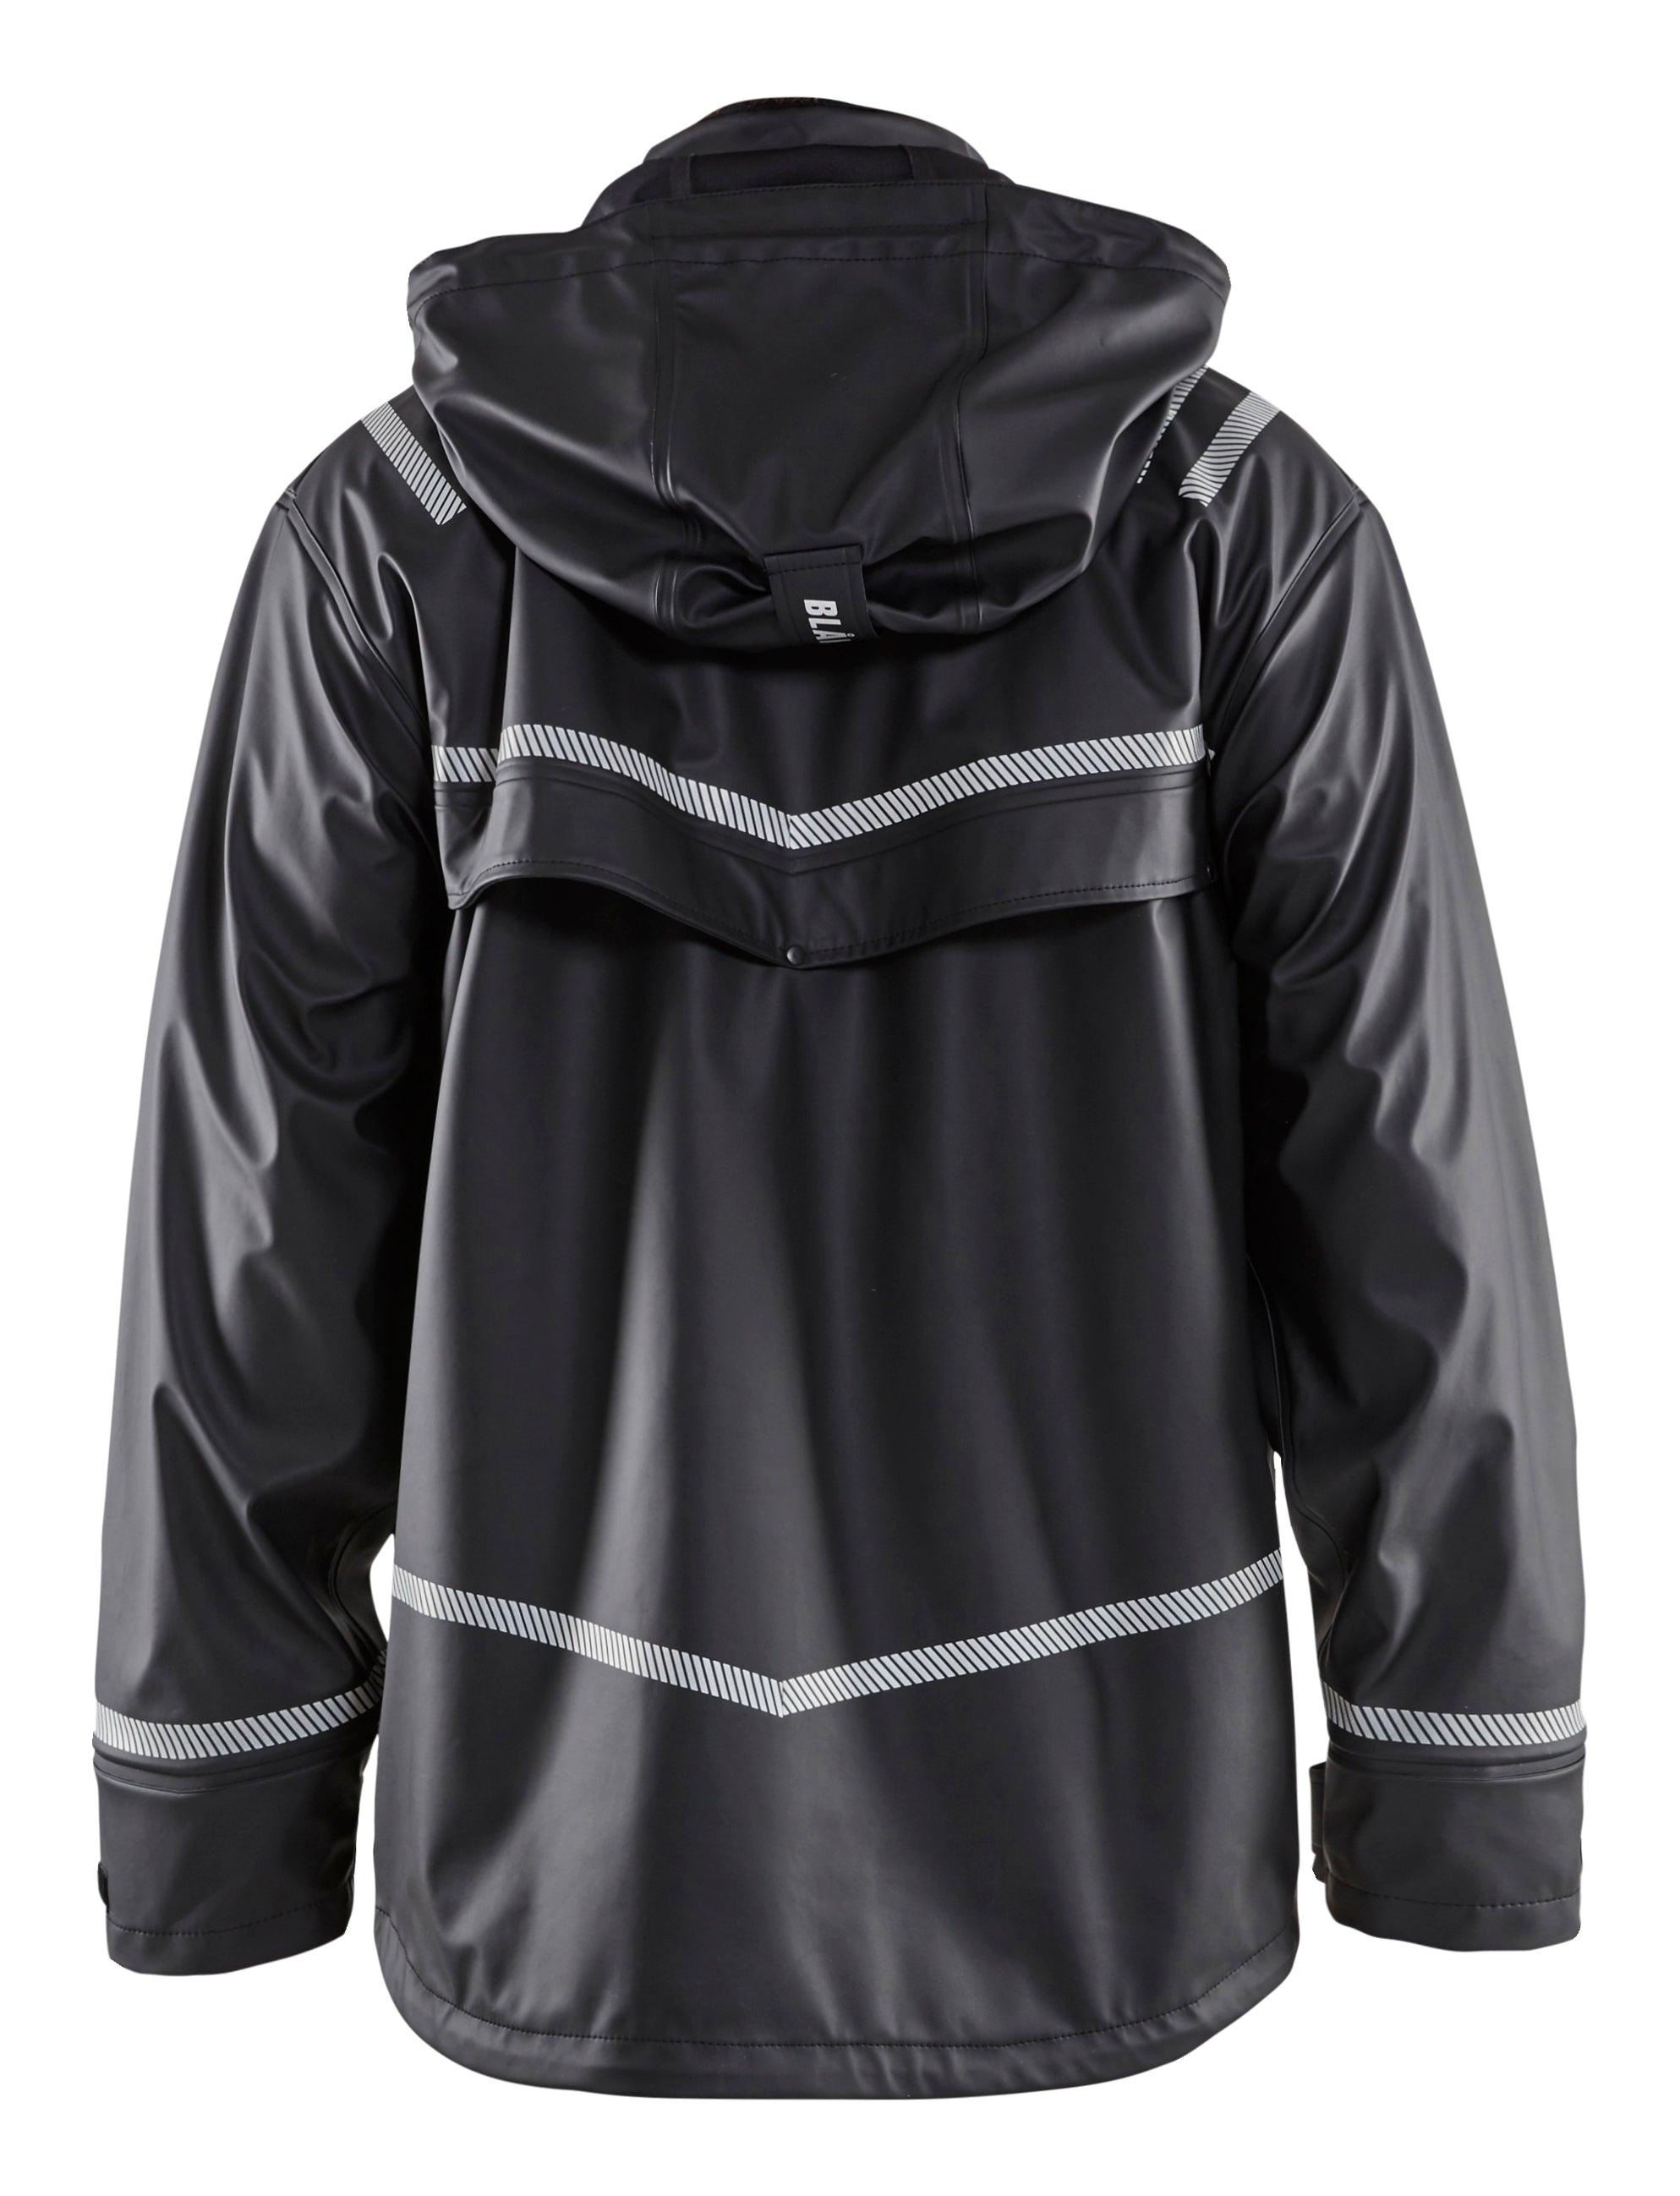 Blaklader 4317 Waterproof Rain Jacket with Reflective Details - Black - Trusted Gear Company LLC